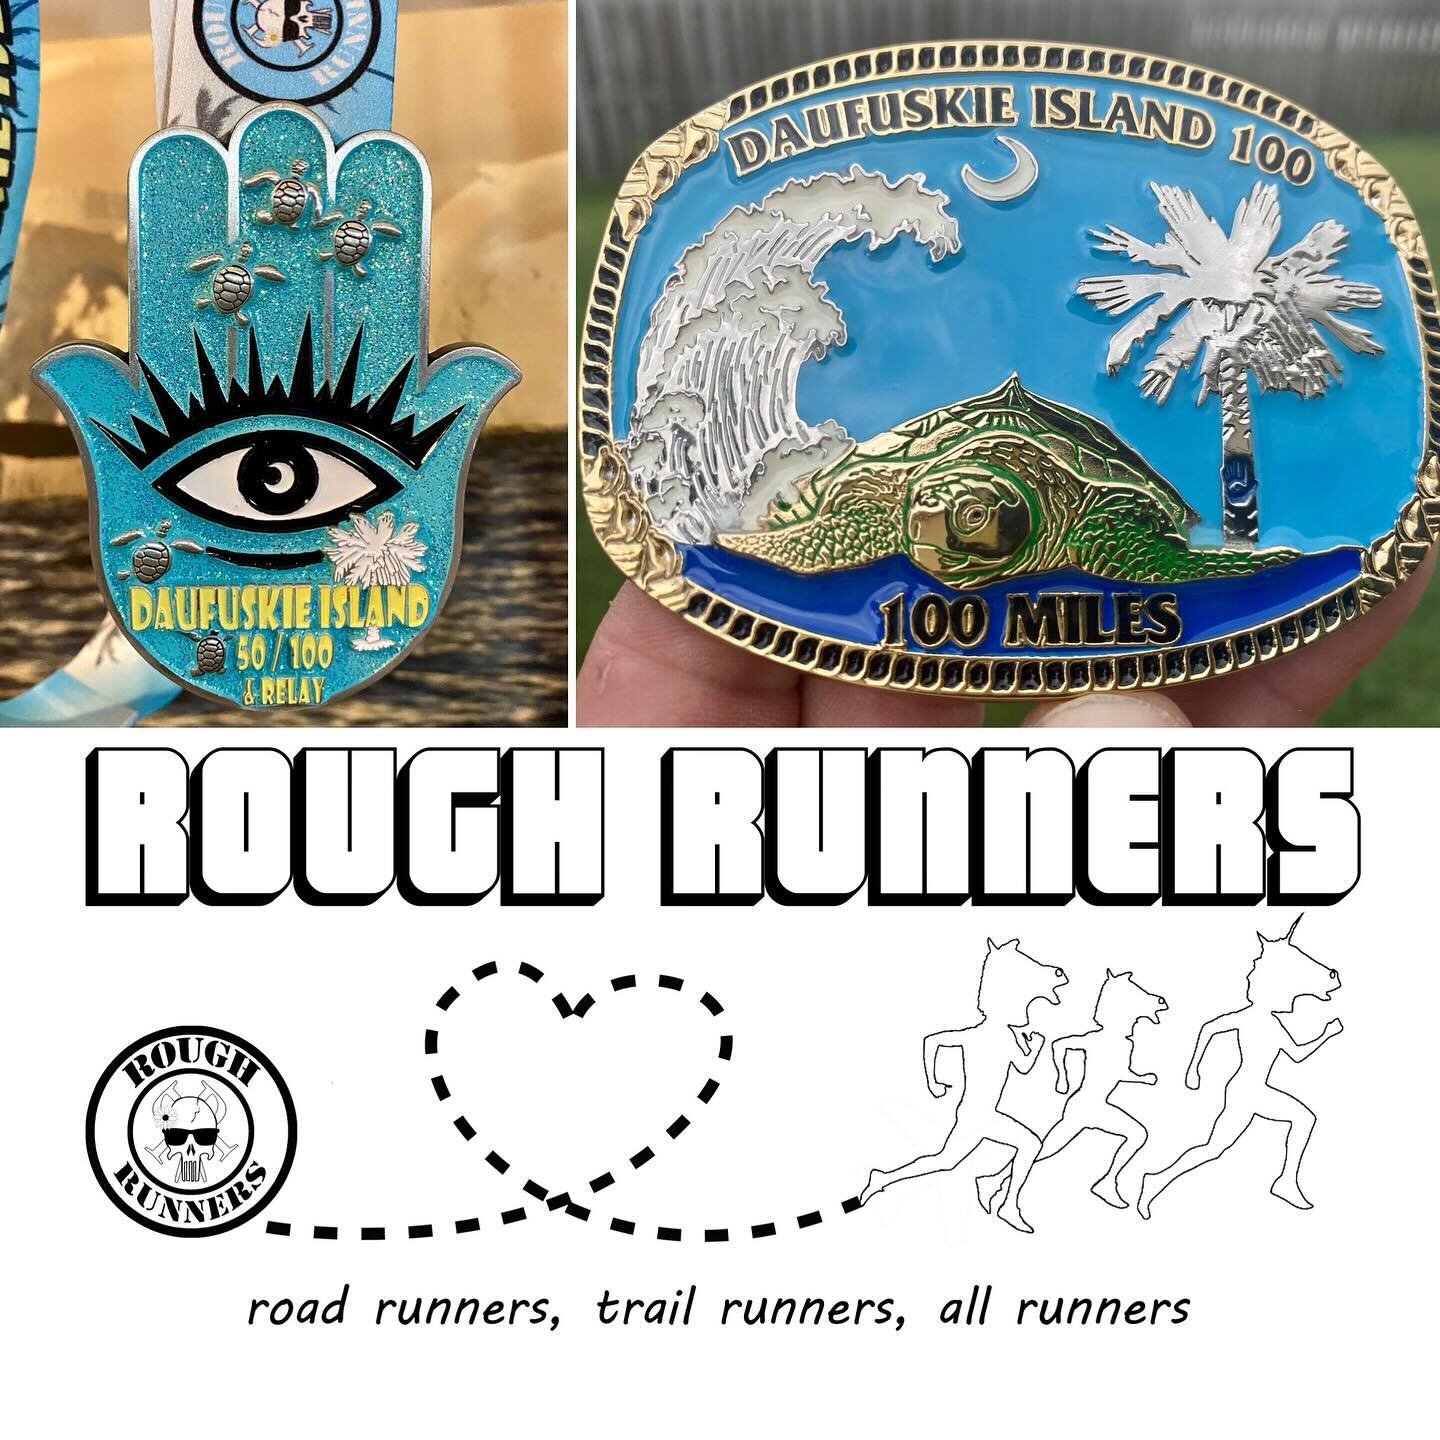 Happy Hump Day!
We welcome each of you to the Rough Runners family and, to the Daufuskie Island Marathon and 100 miler! Thank you for entrusting your running journey with us! We cannot wait to see you at the races below!
Please let us know if you hav